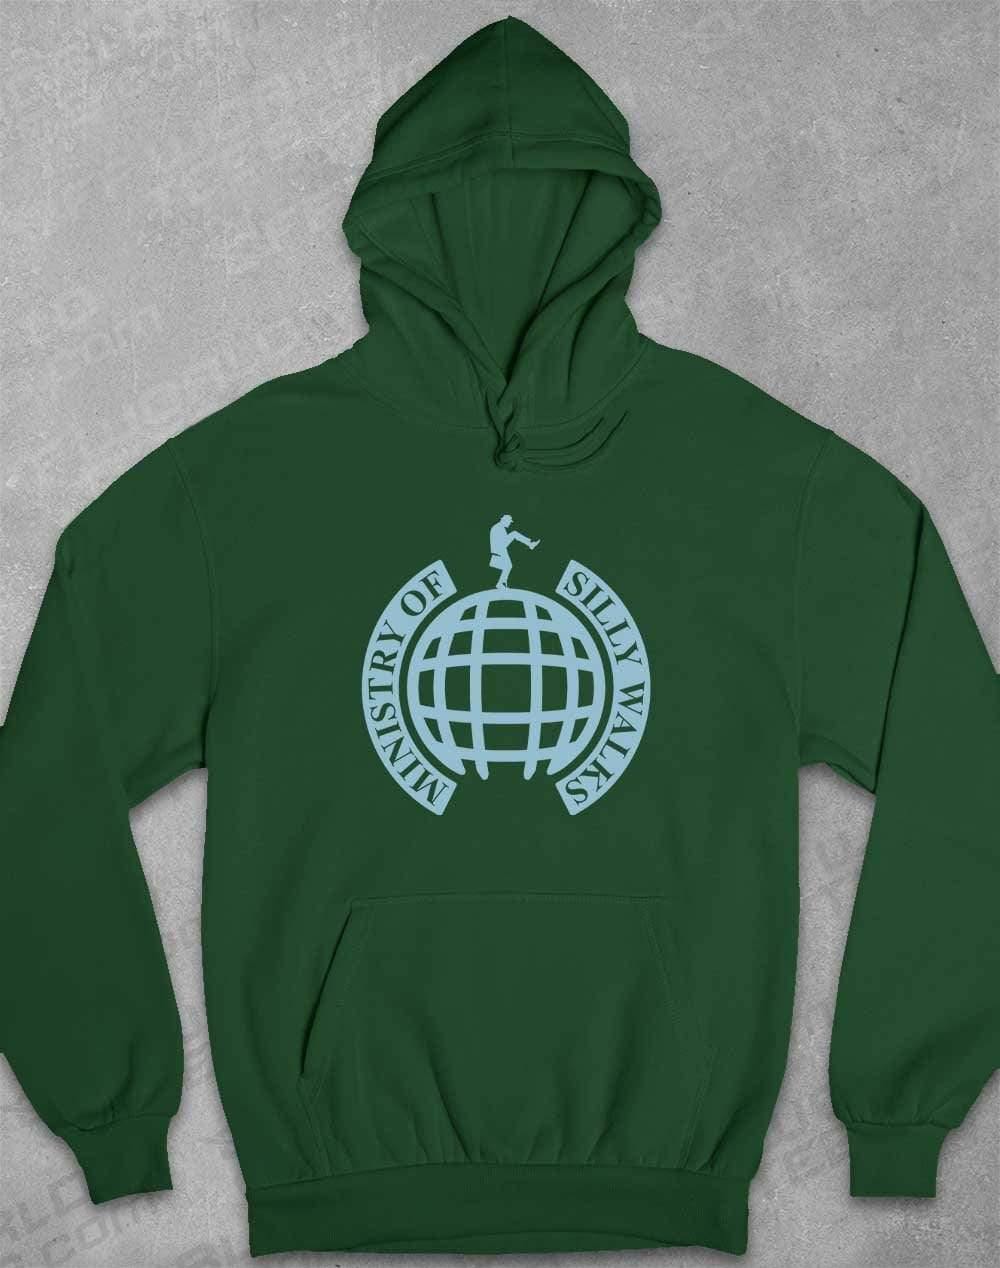 Ministry of Silly Walks Hoodie XS / Bottle Green  - Off World Tees